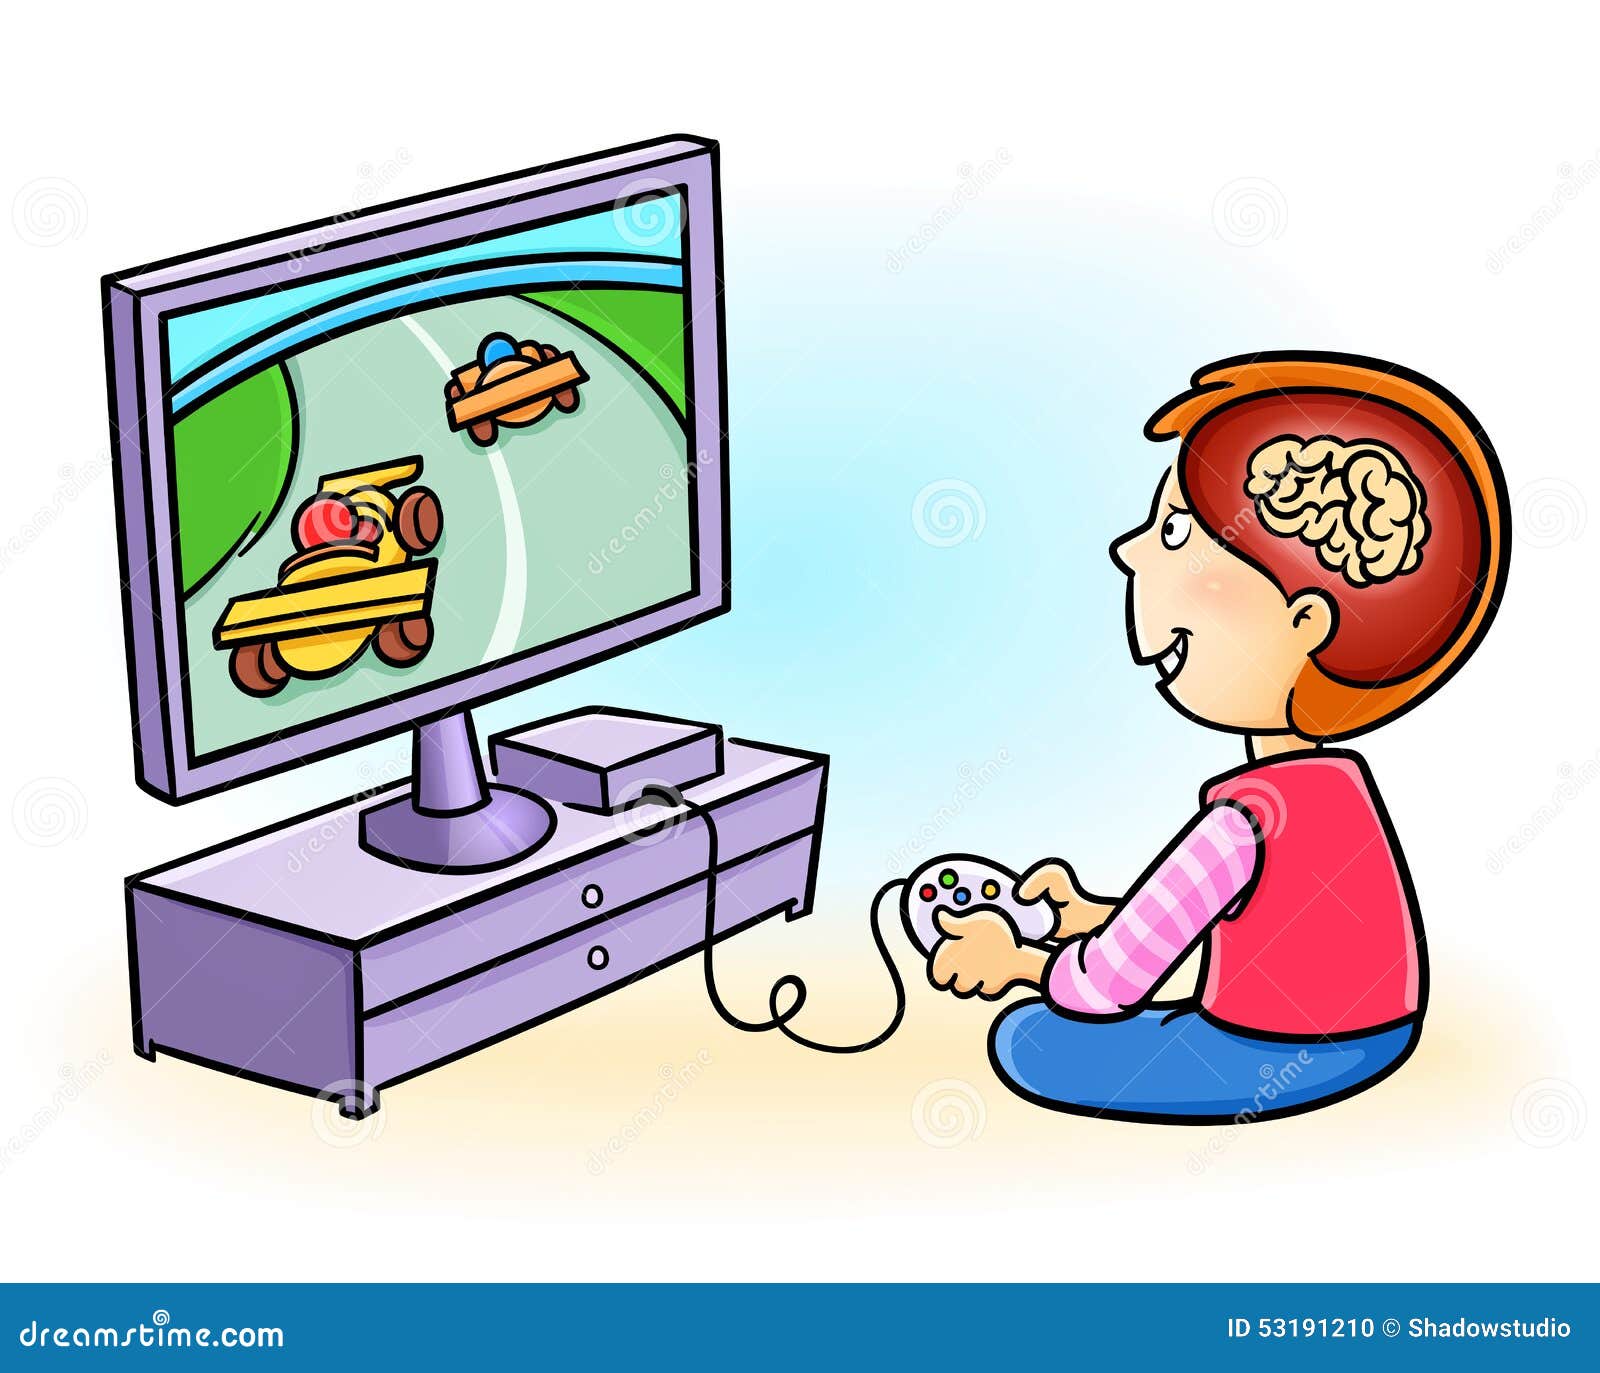 person playing video games clipart - photo #30